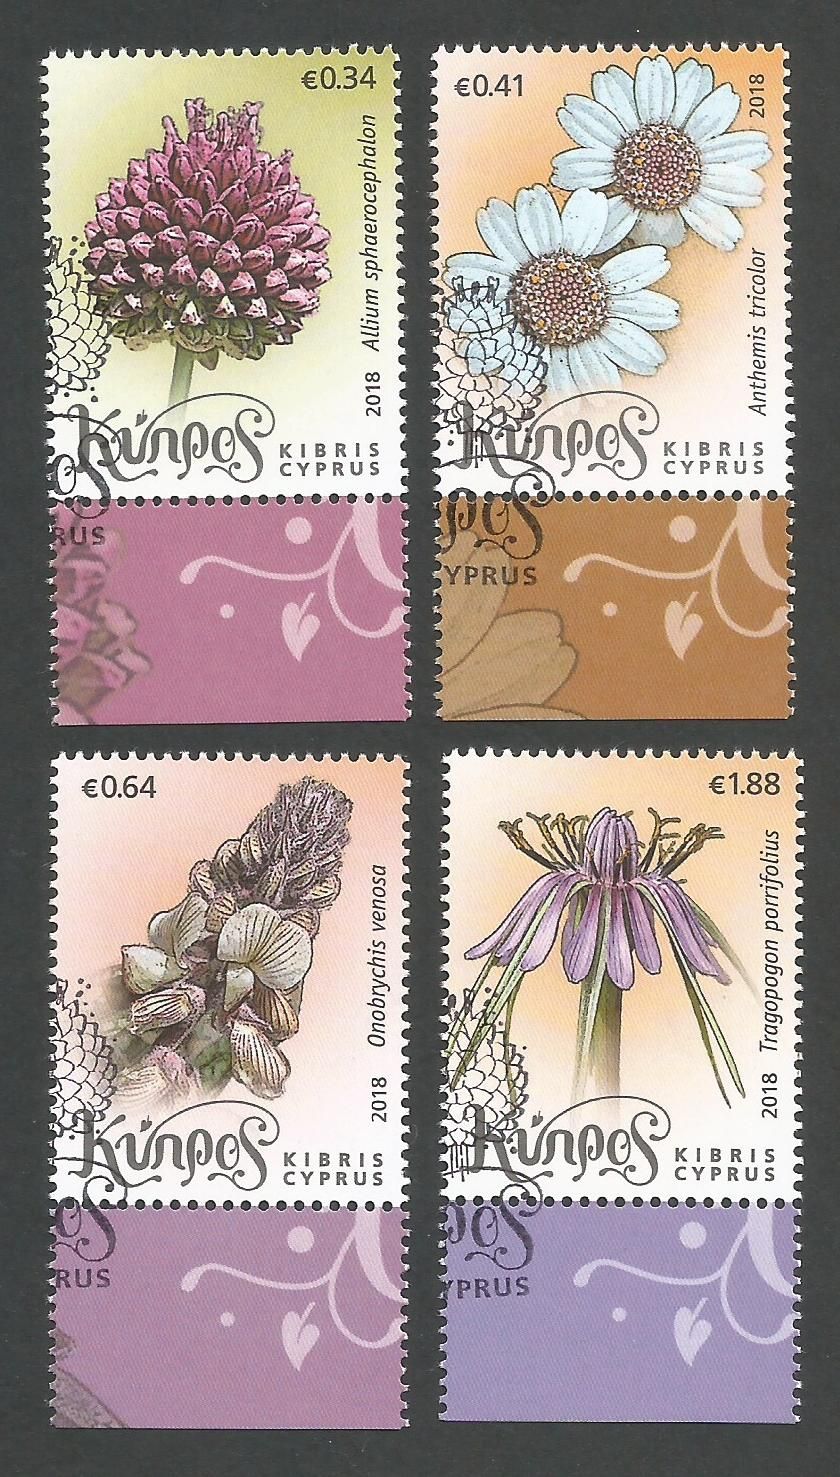 Cyprus Stamps SG 2018 (a) Wild Flowers of Cyprus -  CTO USED (k613)